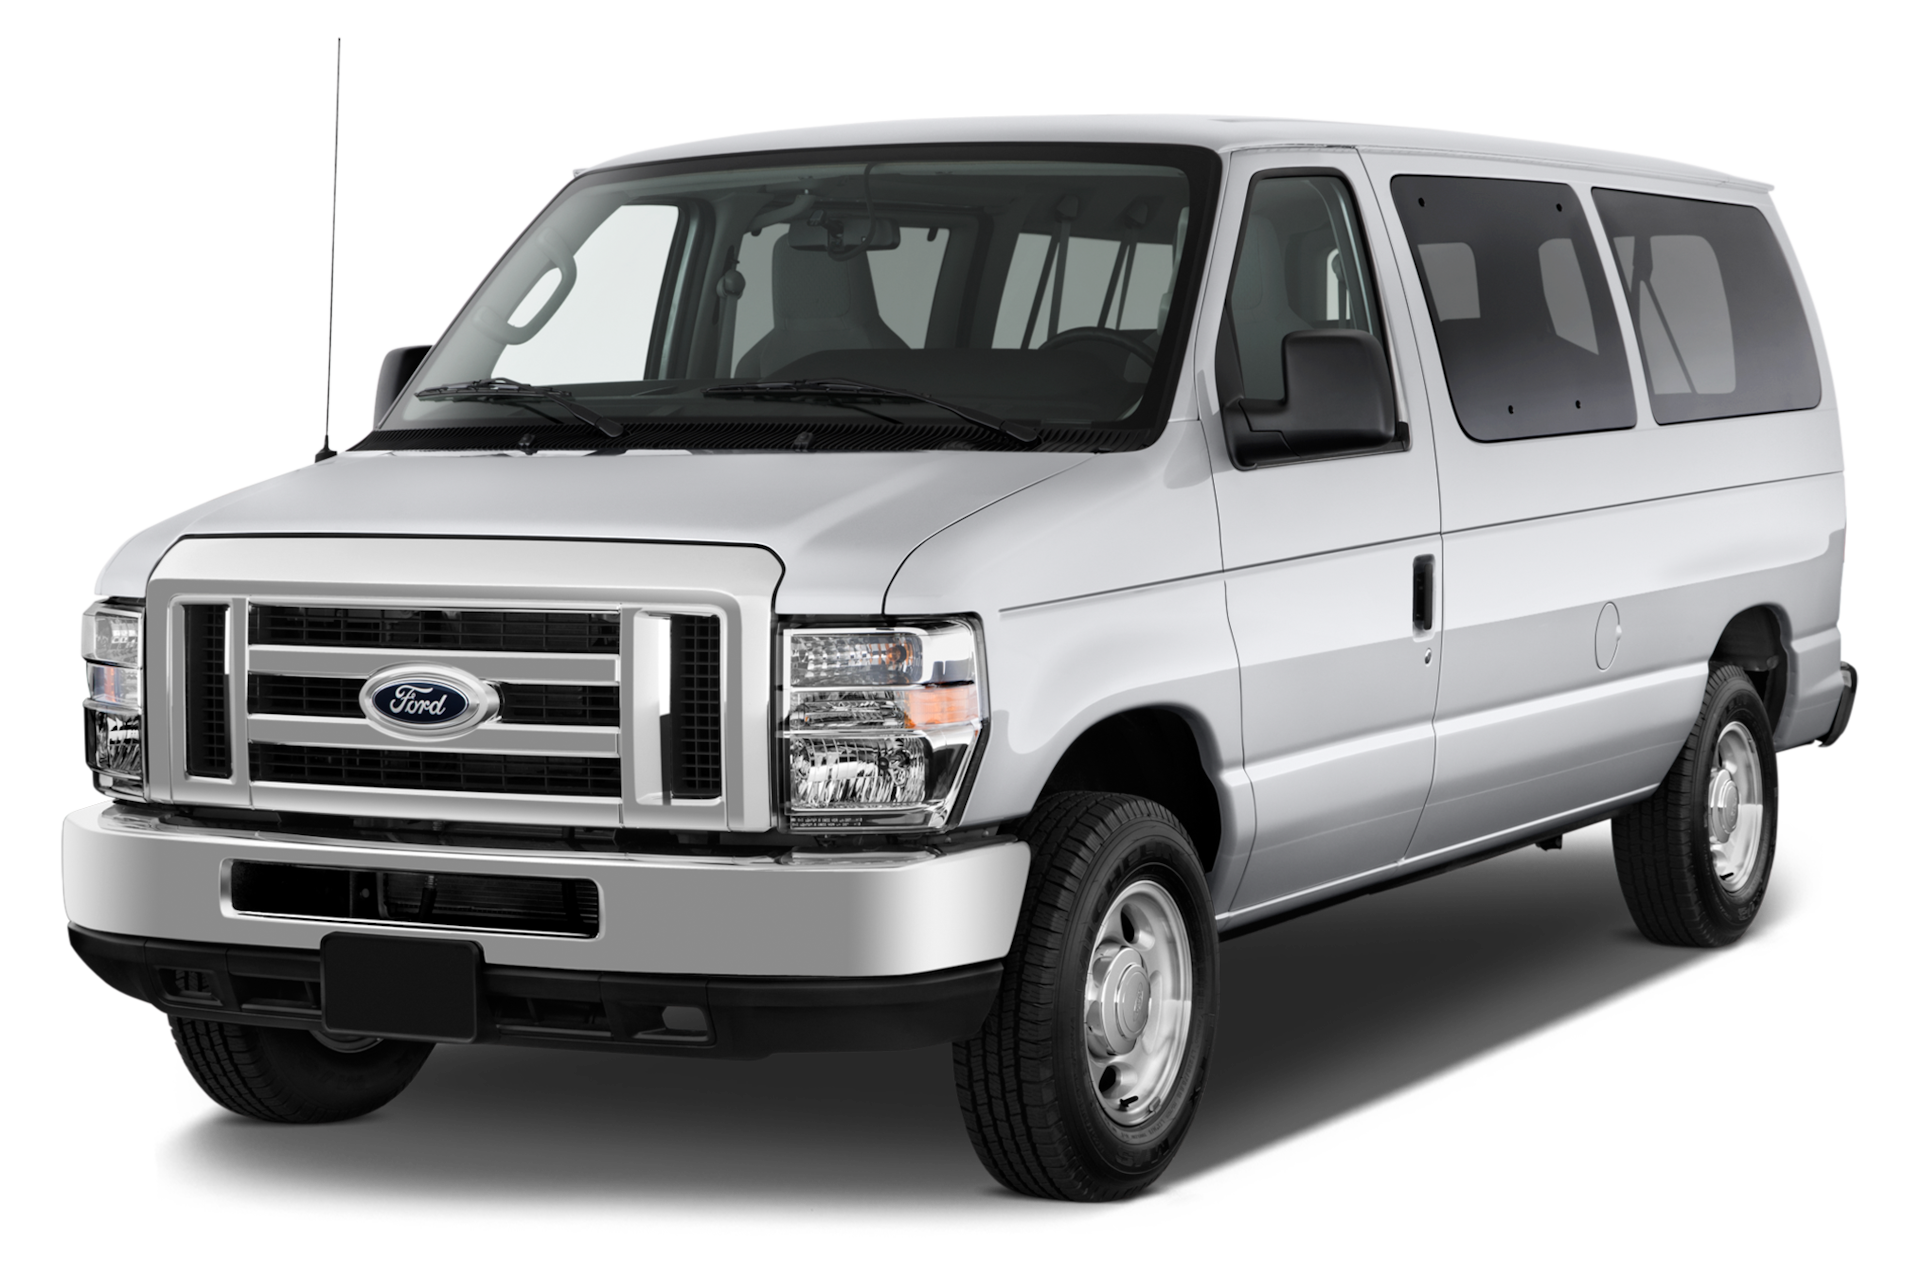 2014 Ford E-150 Prices, Reviews, and Photos - MotorTrend